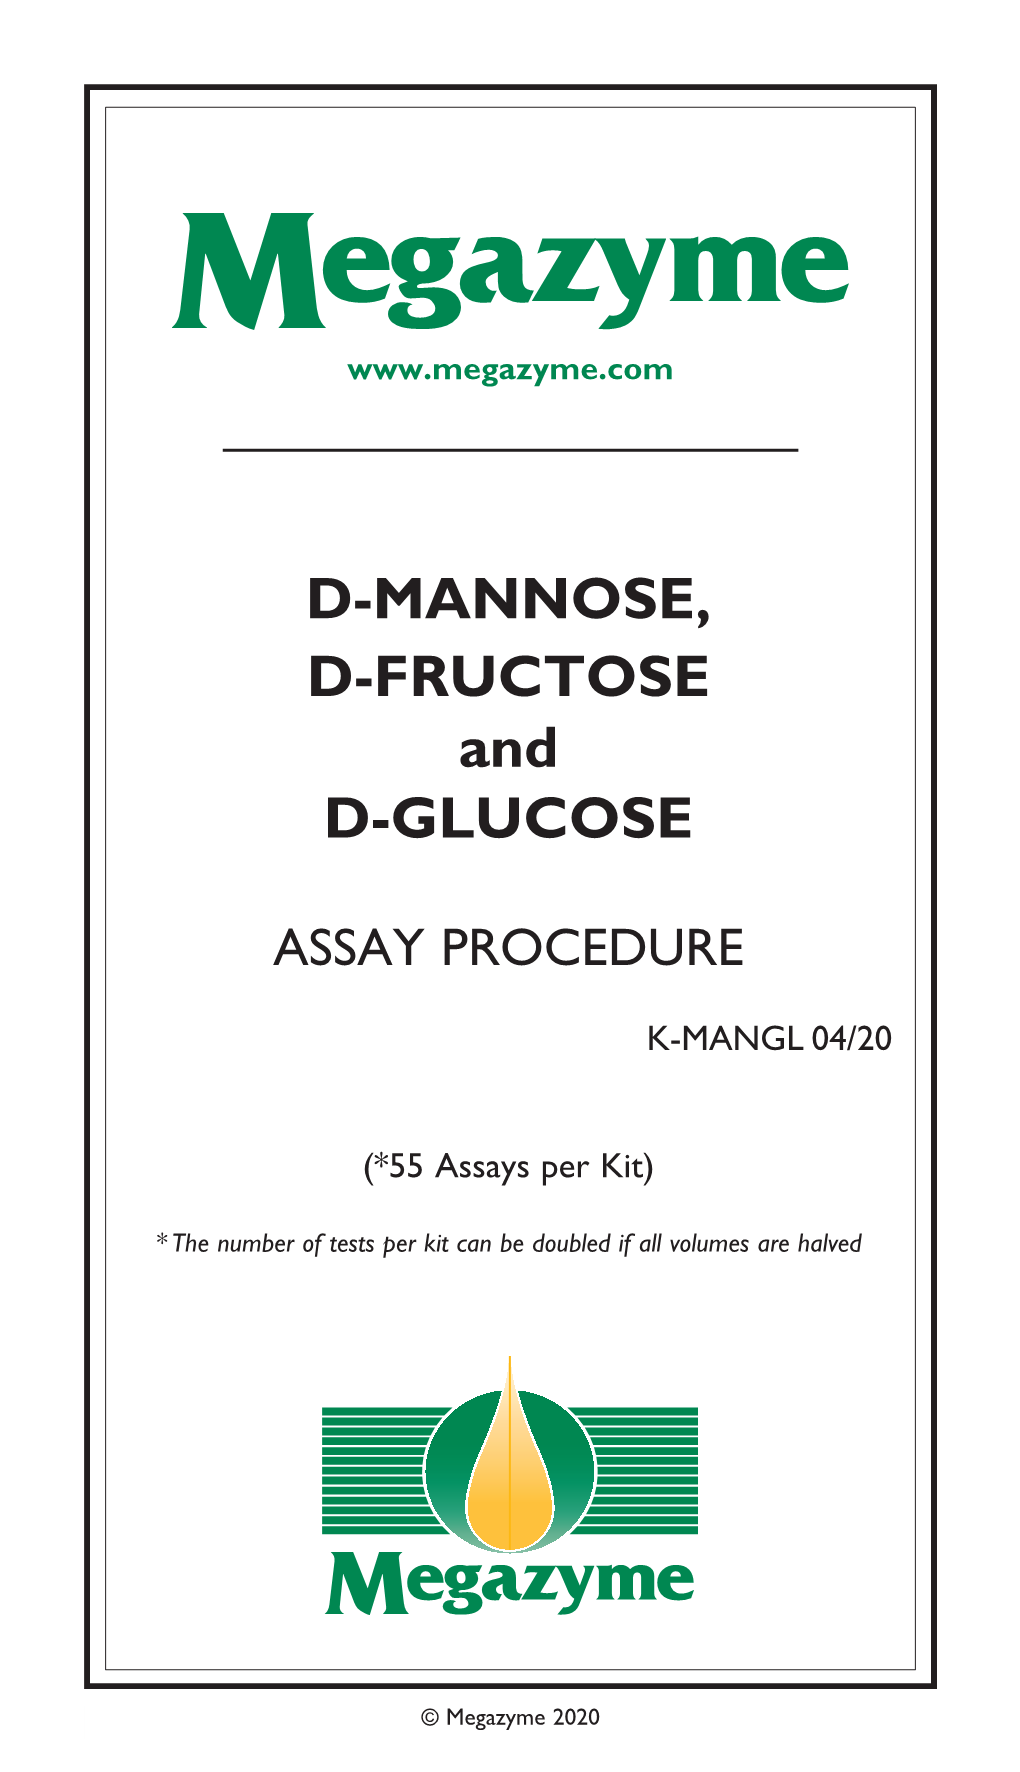 D-MANNOSE, D-FRUCTOSE and D-GLUCOSE